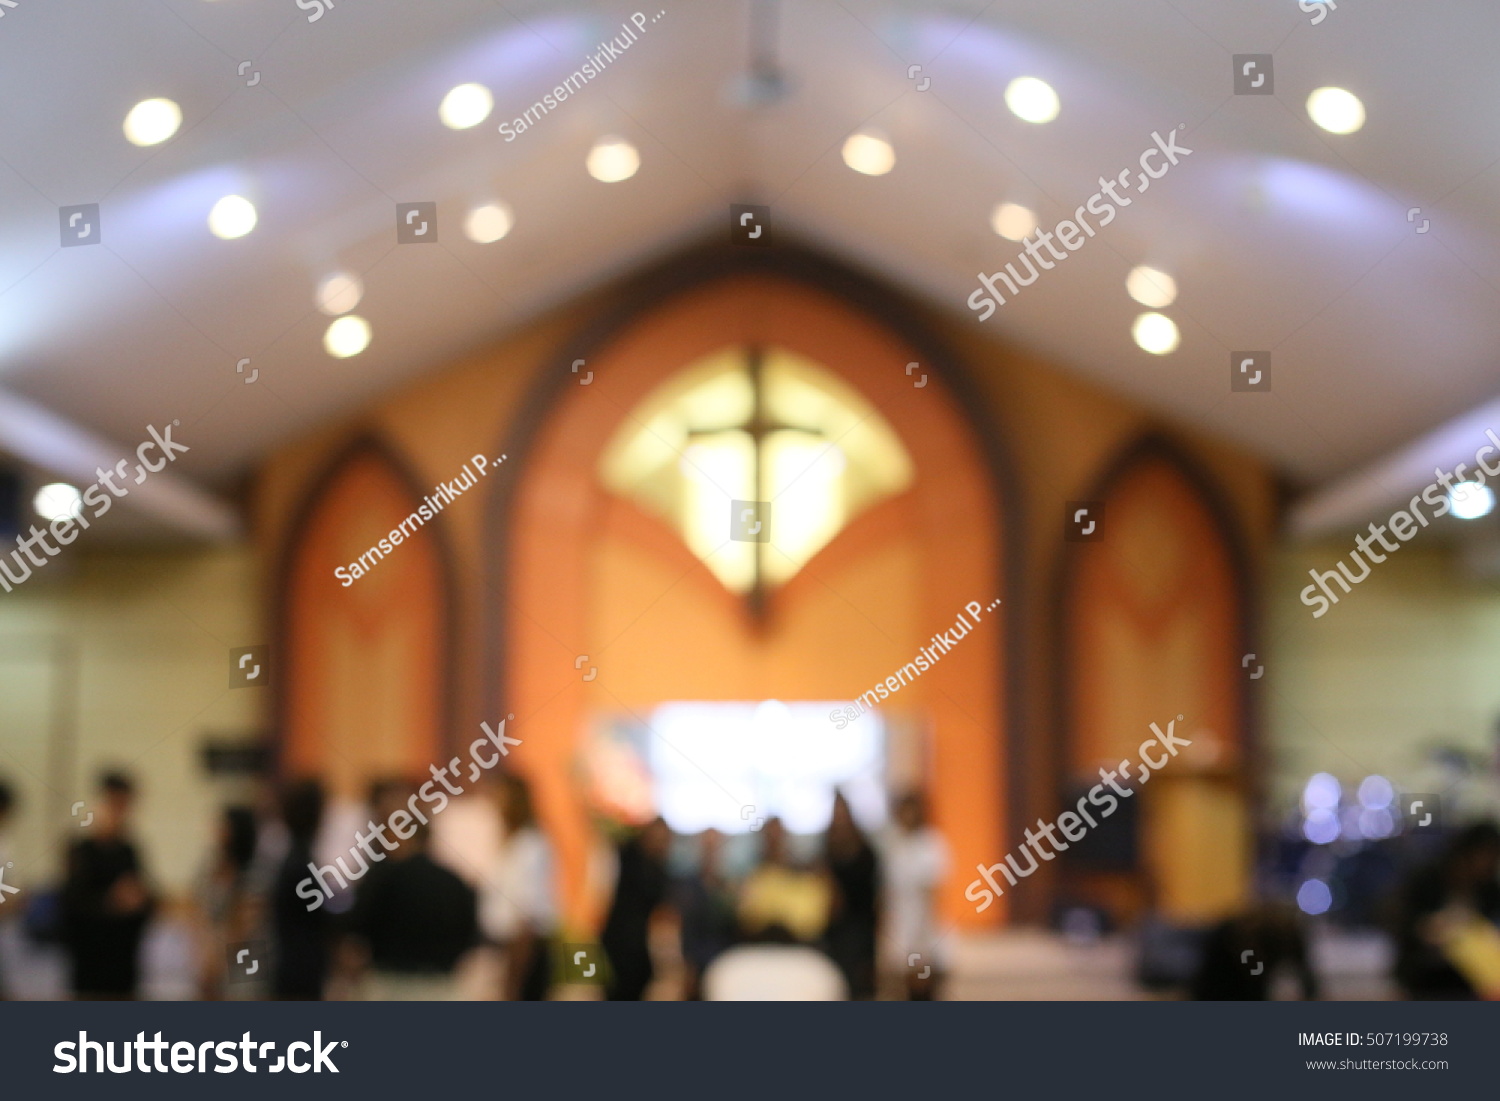 Blurred of Church interior with church cross #507199738